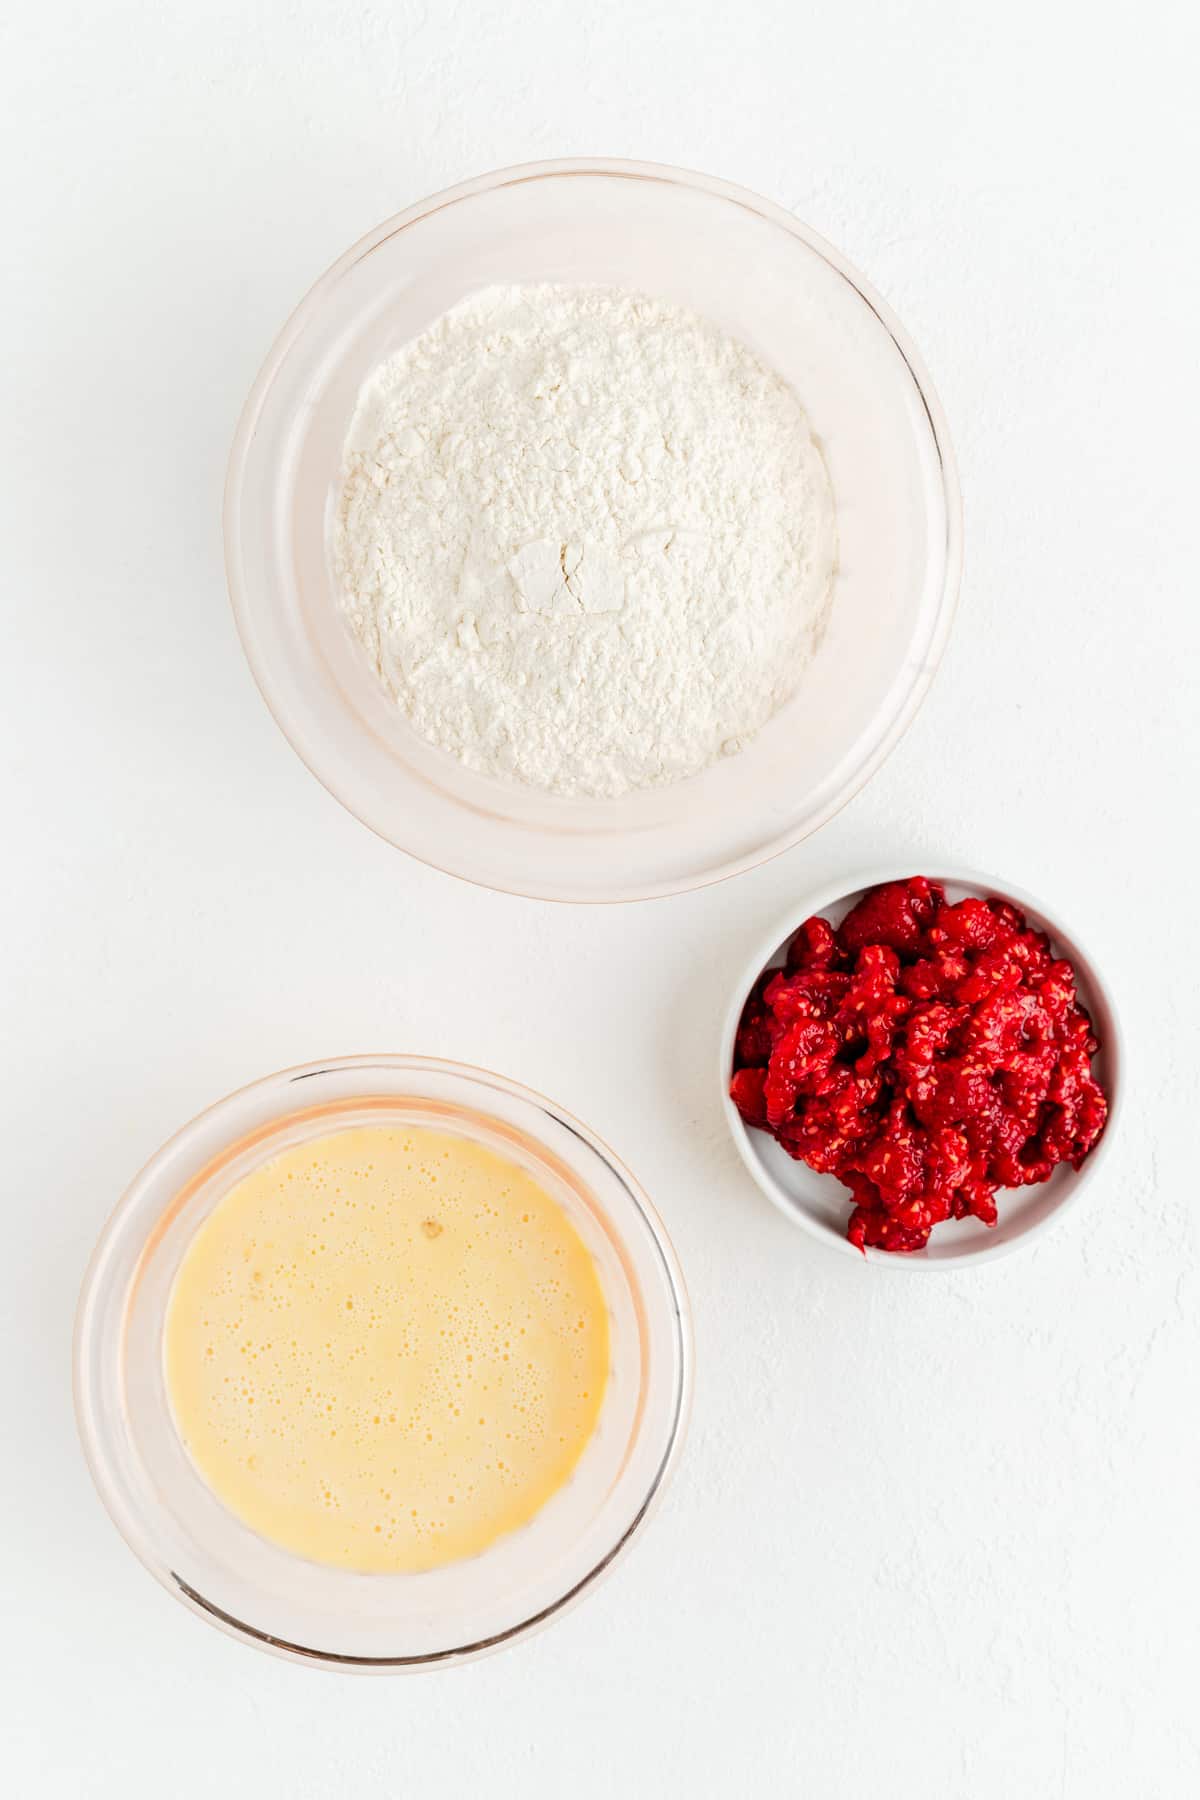 Dry ingredients wet ingredients in crushed fresh raspberries in their own bowls on white background.